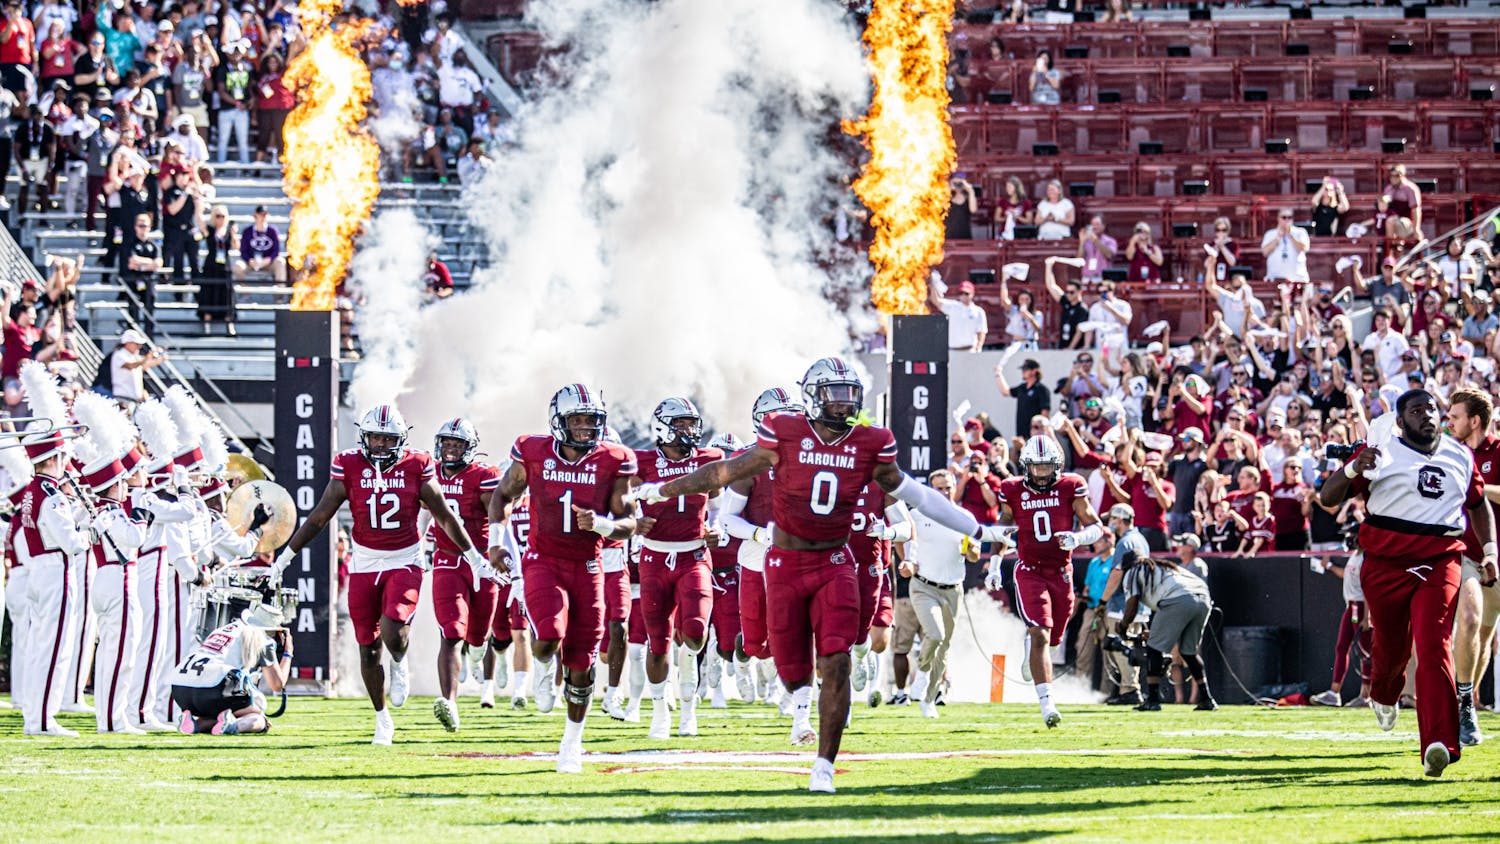 South Carolina football rushes the field for kickoff at the Troy football game Oct. 2, 2021.&nbsp;